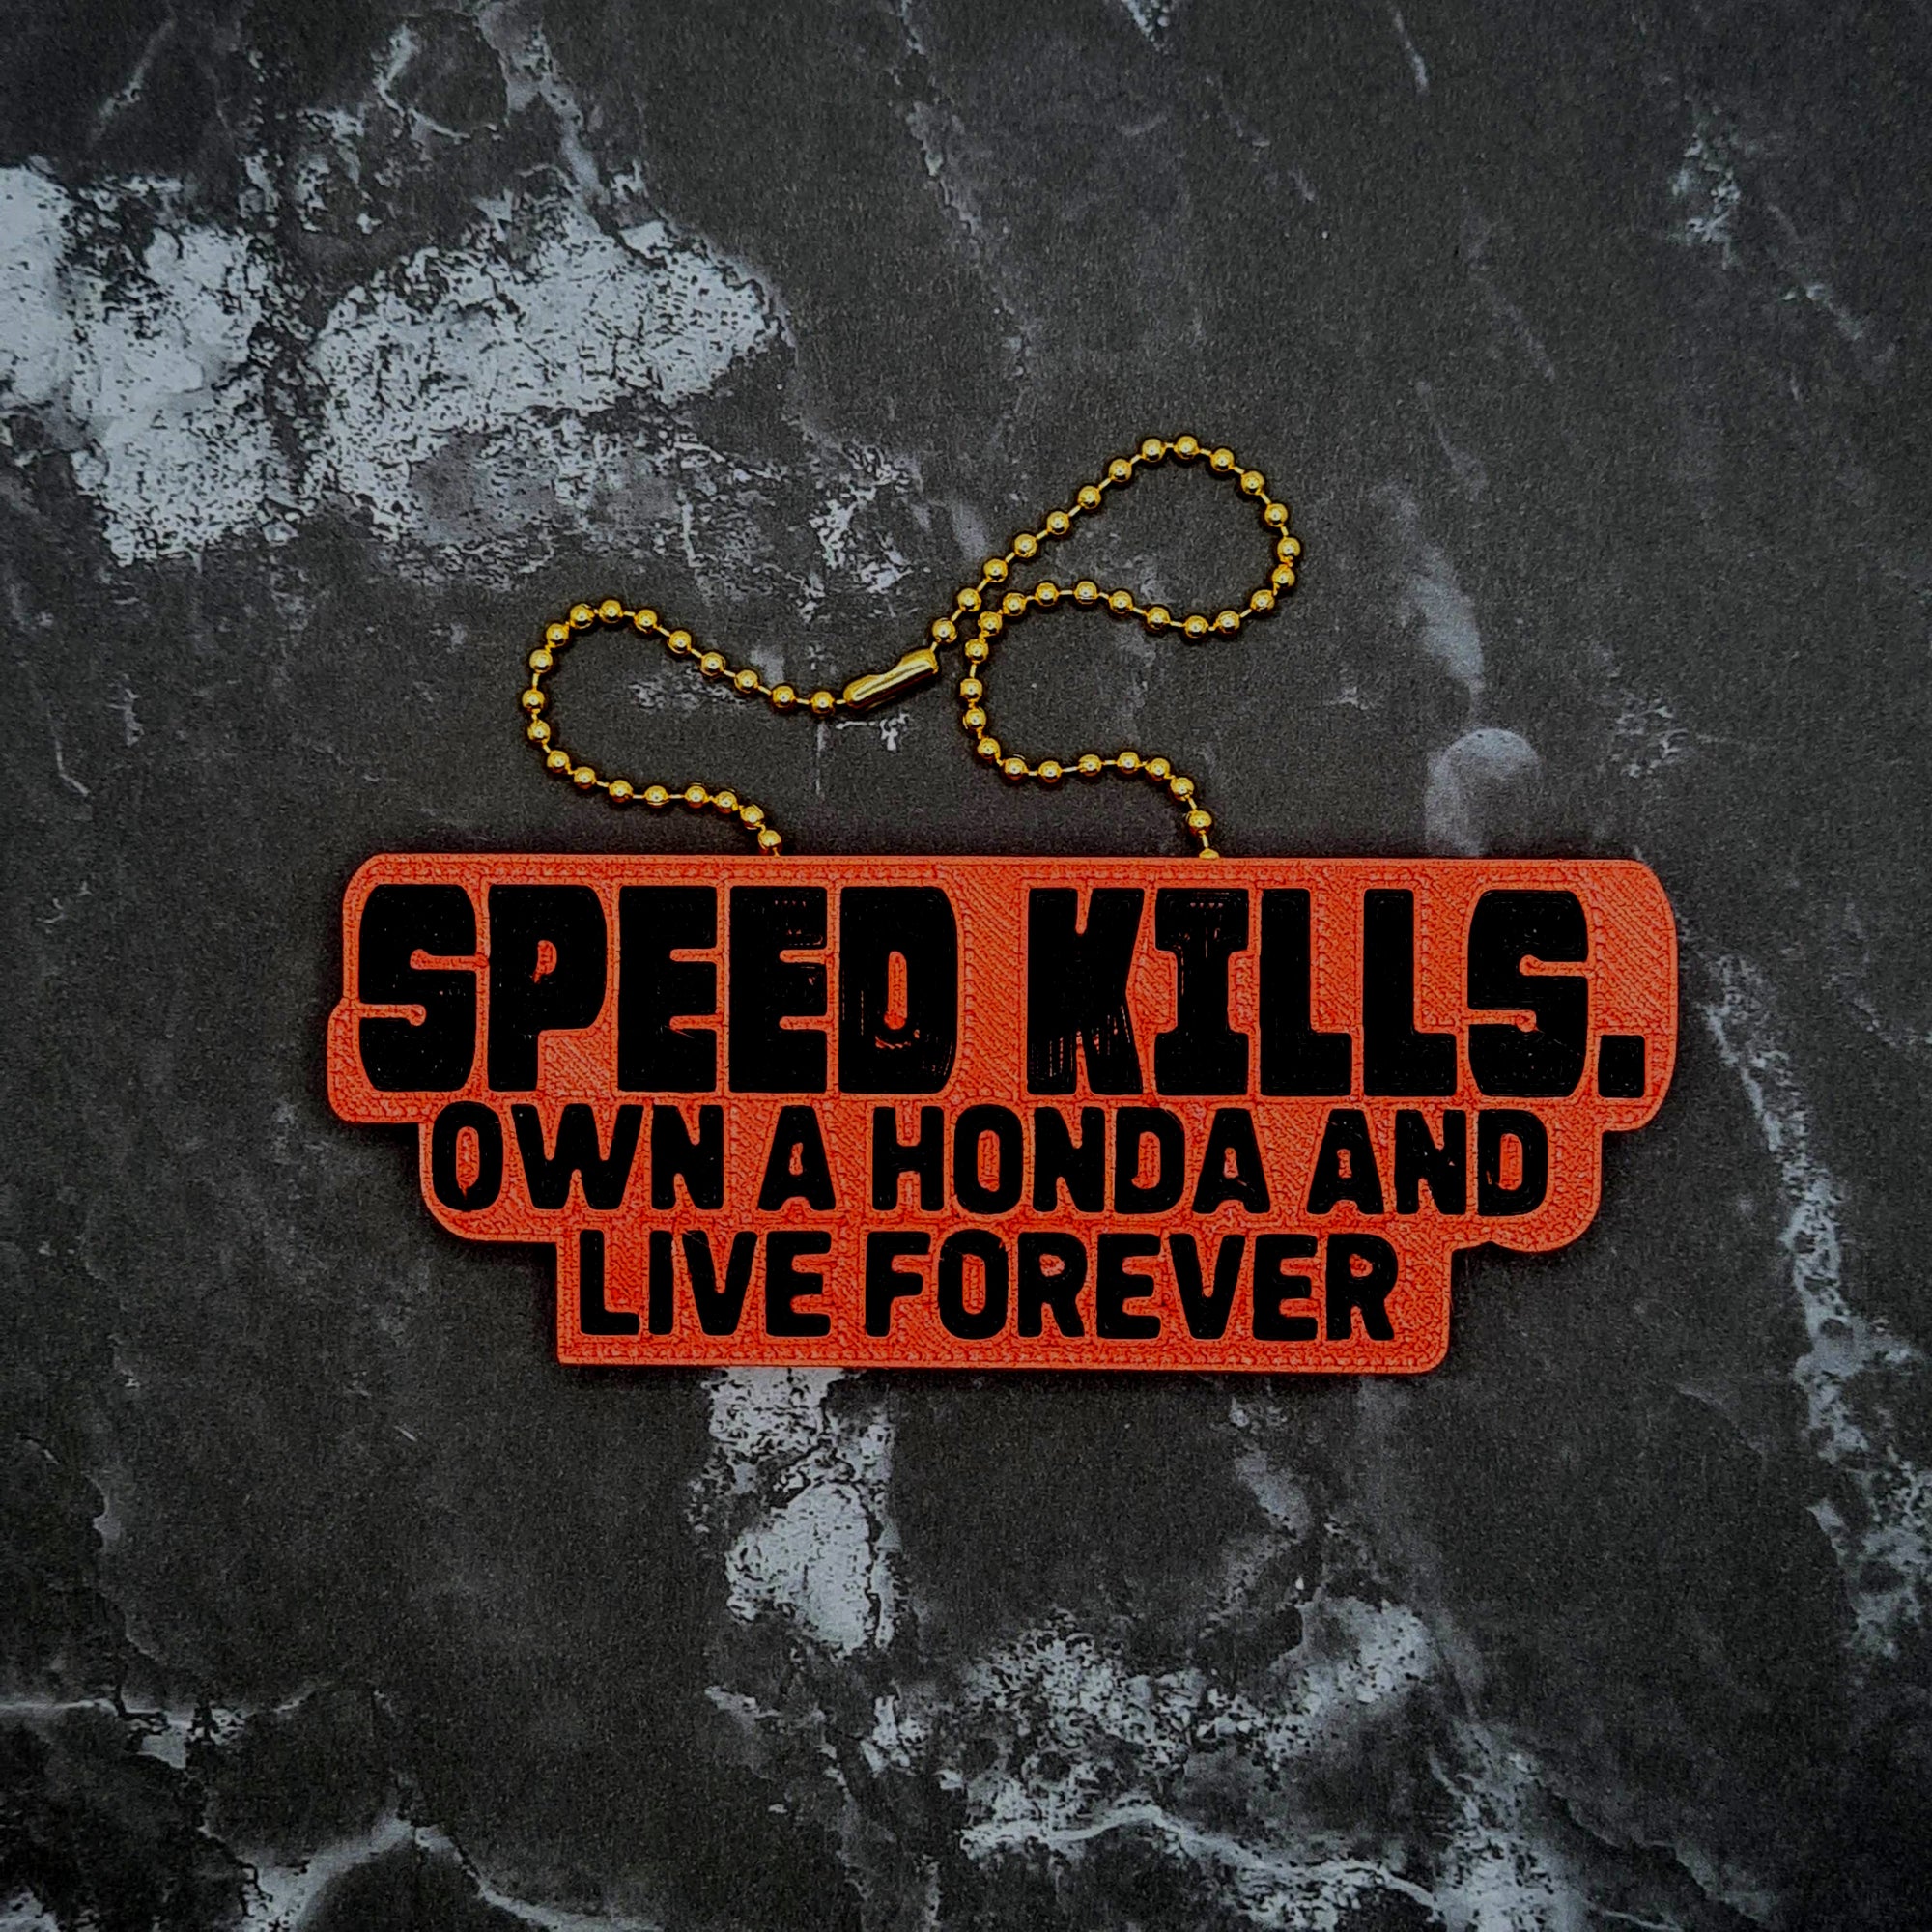 Speed Kills, Drive a Honda and Live Forever Charm!